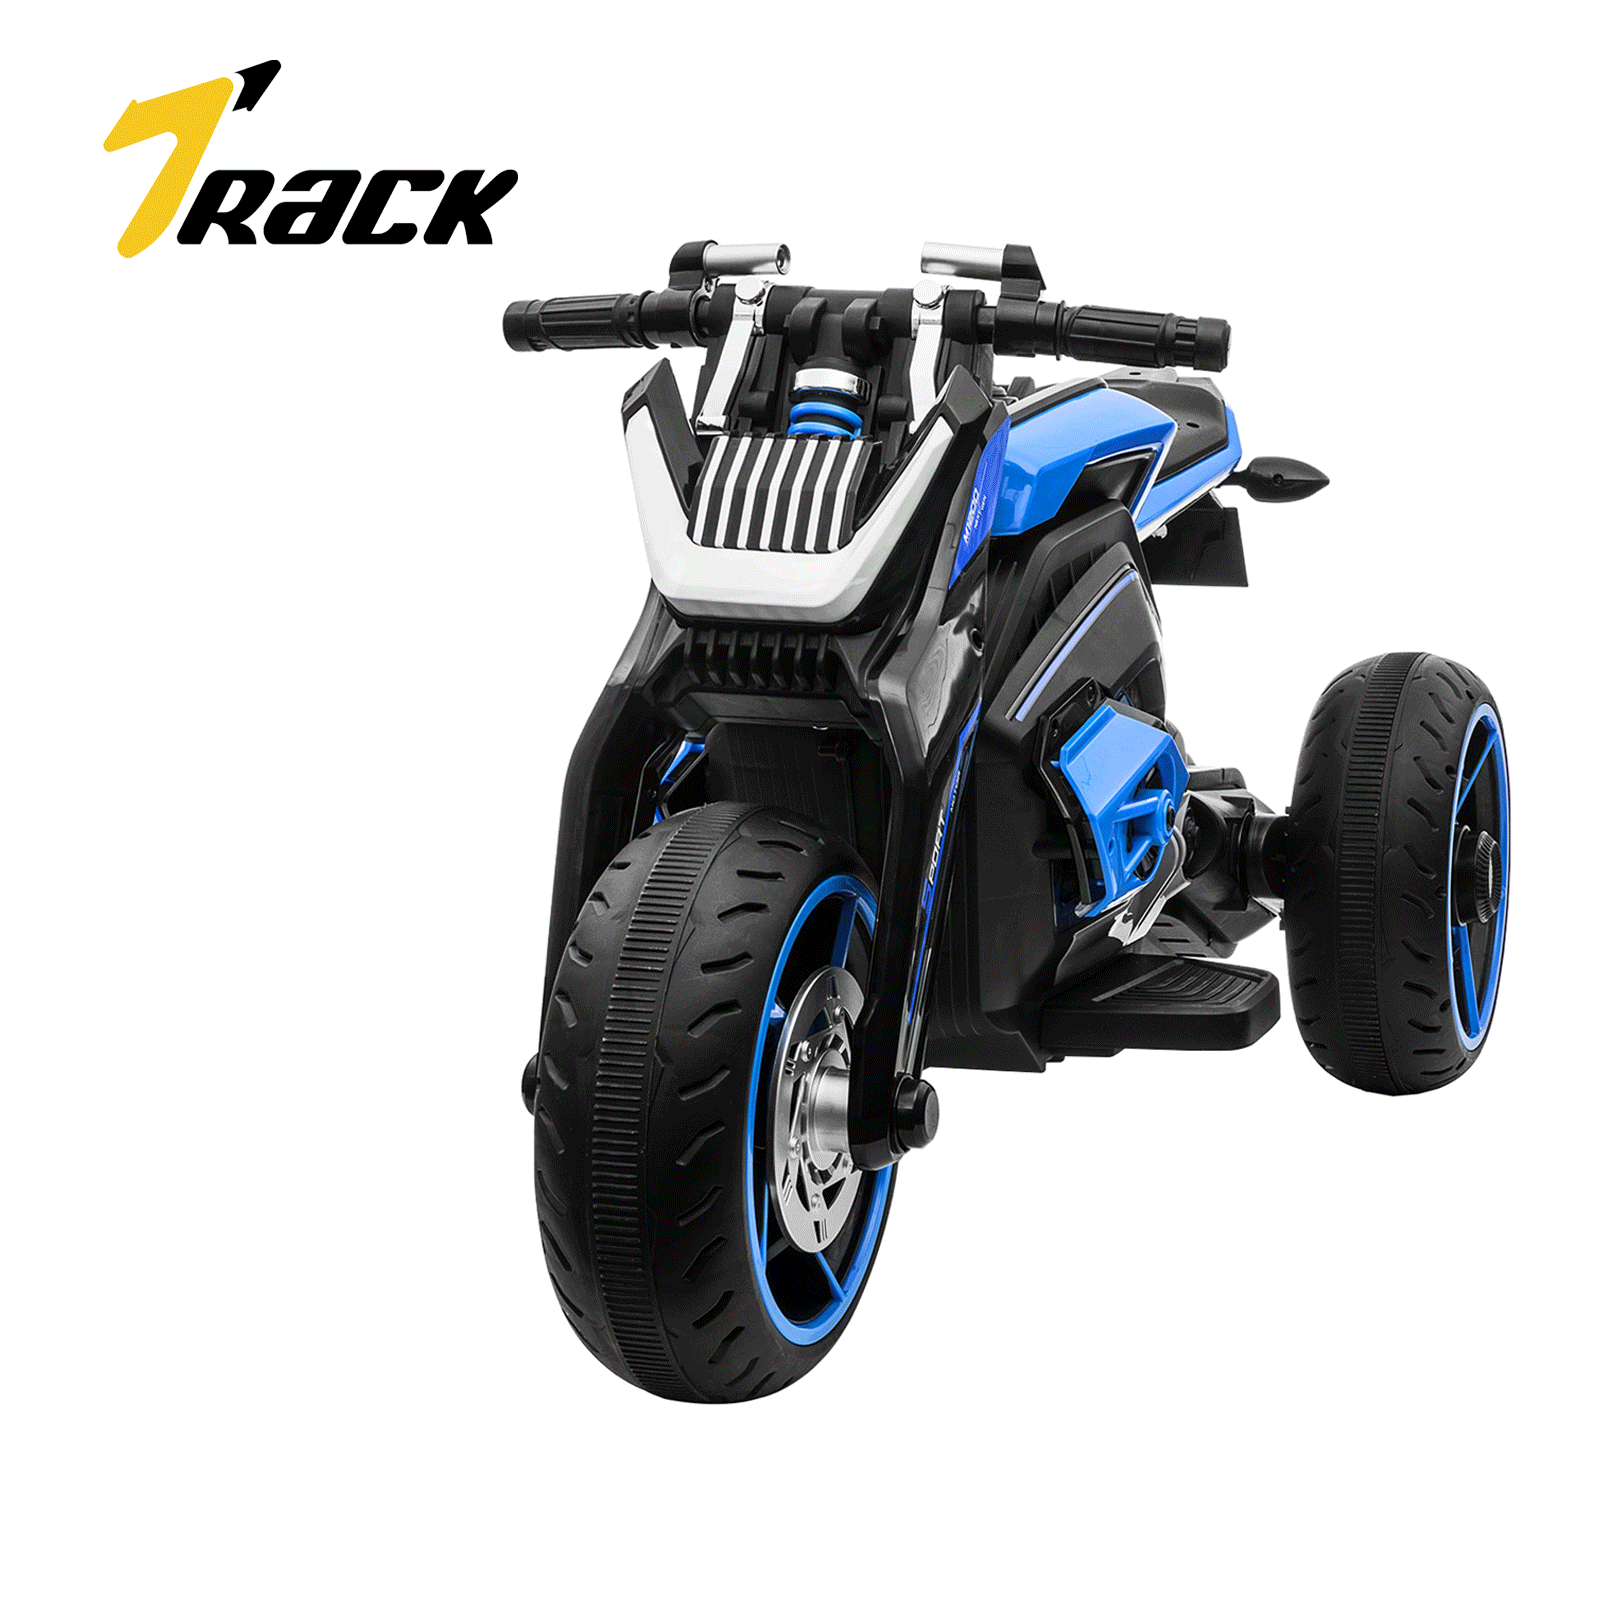 Track 7 Kids Ride on Motorcycle,12V Battery Powered Electric Trike Motorcycle for Boys Girls,3 Wheels Motorcycle for Kids,4 Button Horn,Lights,Kids Ride on Toy Car,Blue